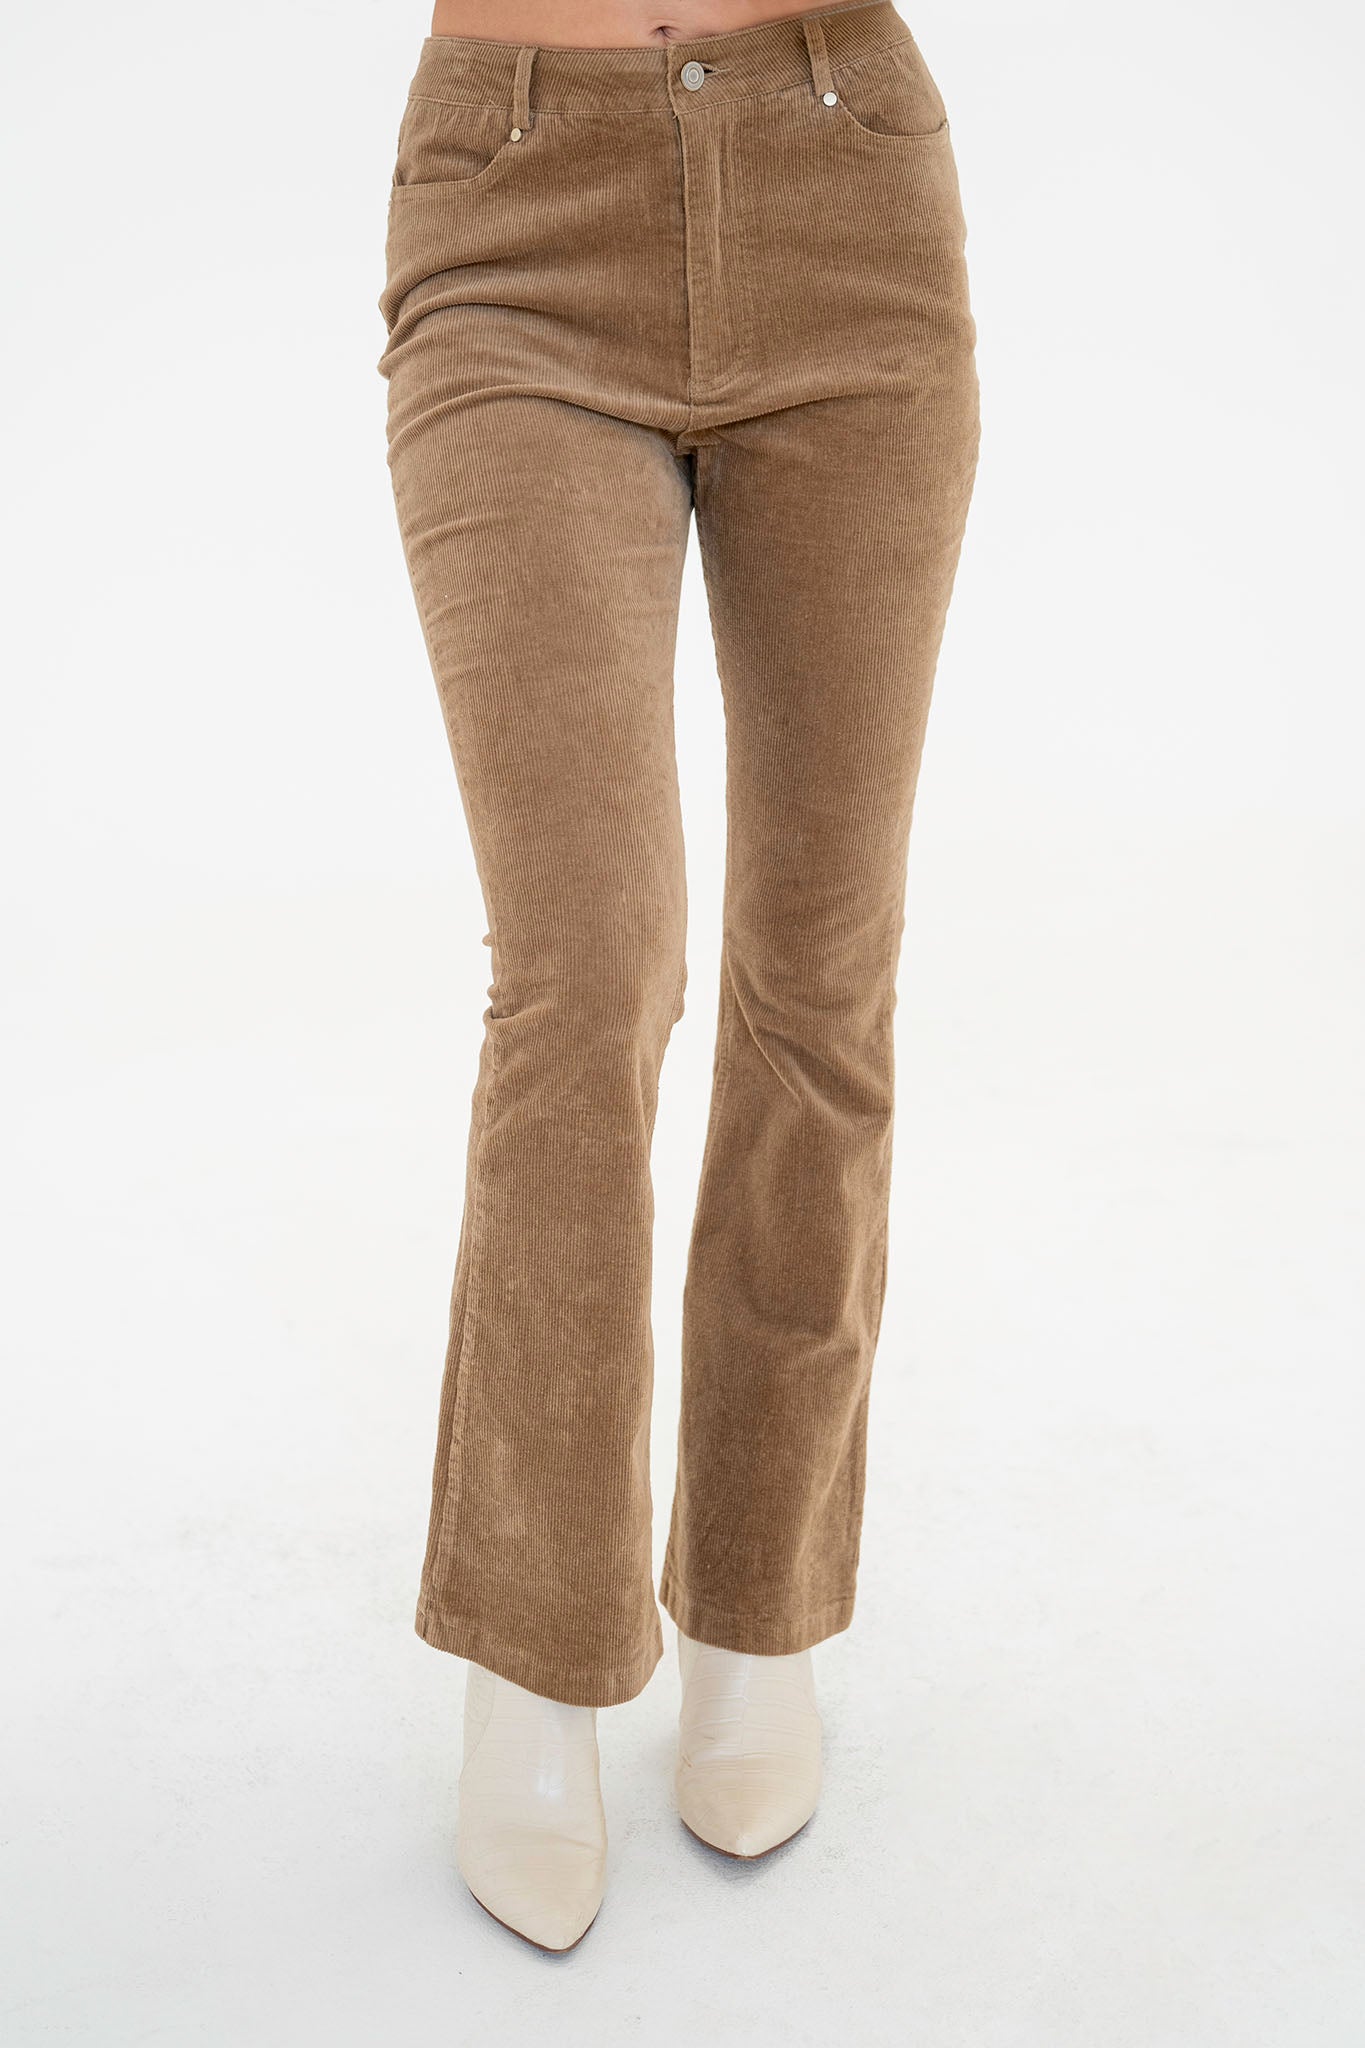 View 1 of Firefly Flared Corduroy Pants, a Pants from Larrea Cove. Detail: Introducing the new Firefly Flared C...